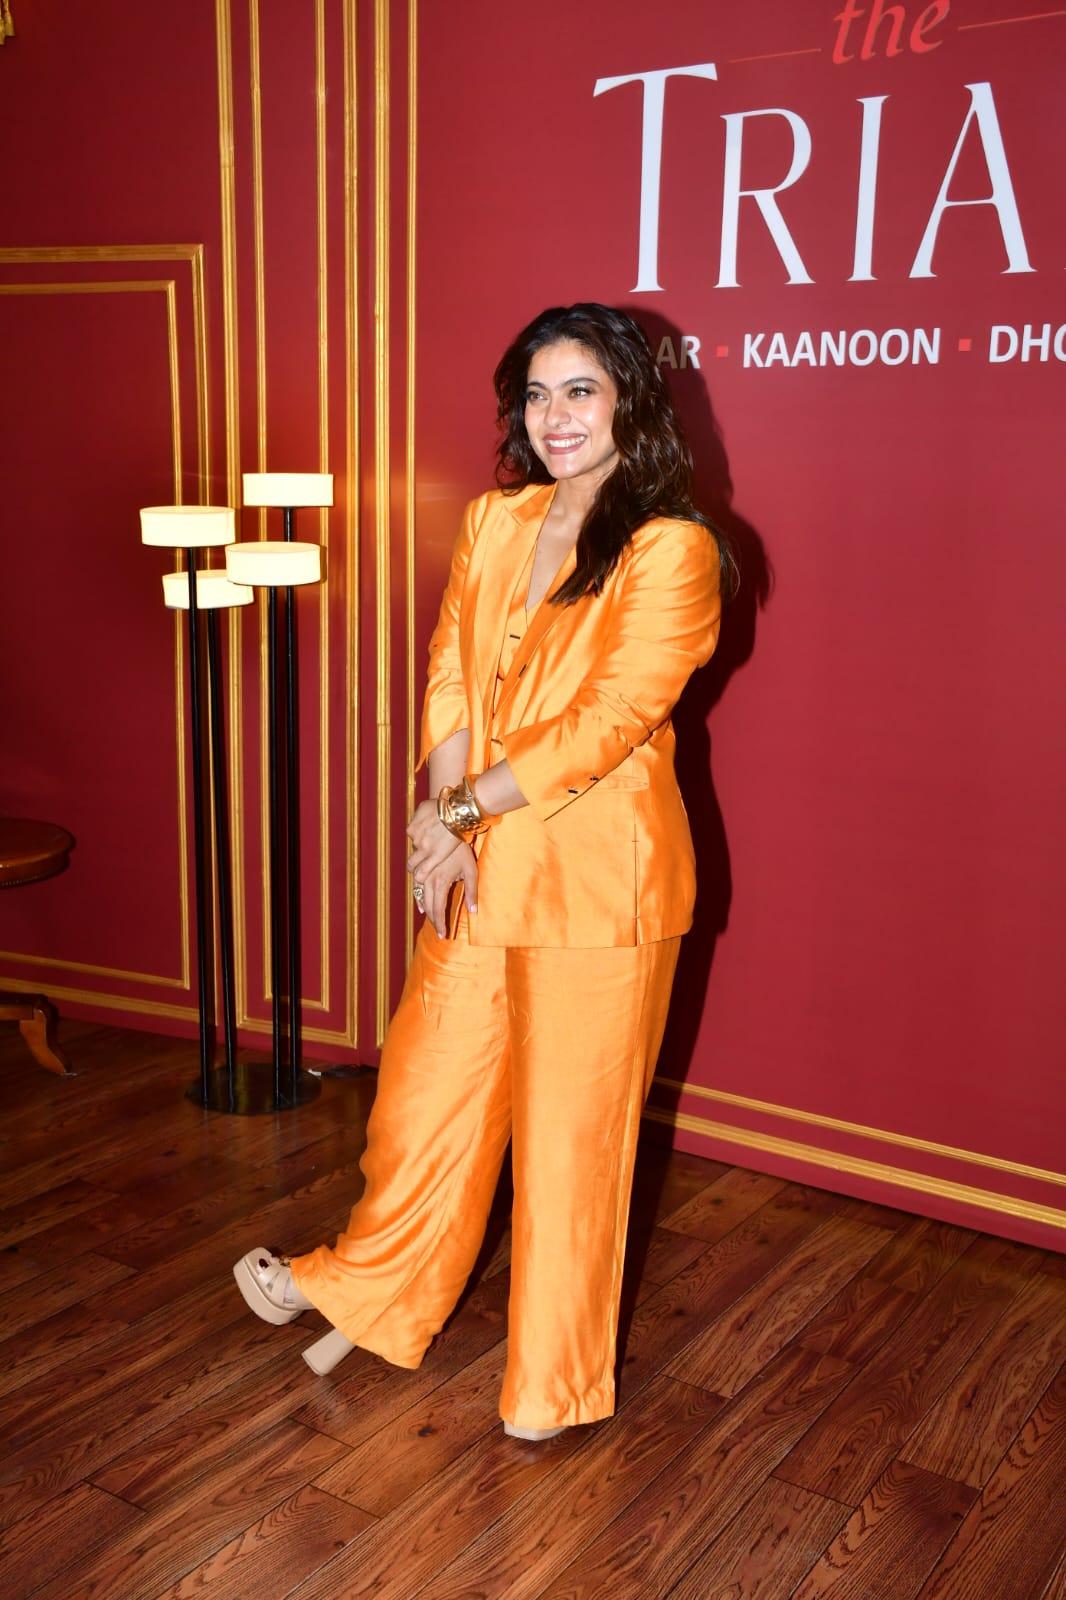 Kajol was spotted at an event today promoting her upcoming OTT show 'The Trial'